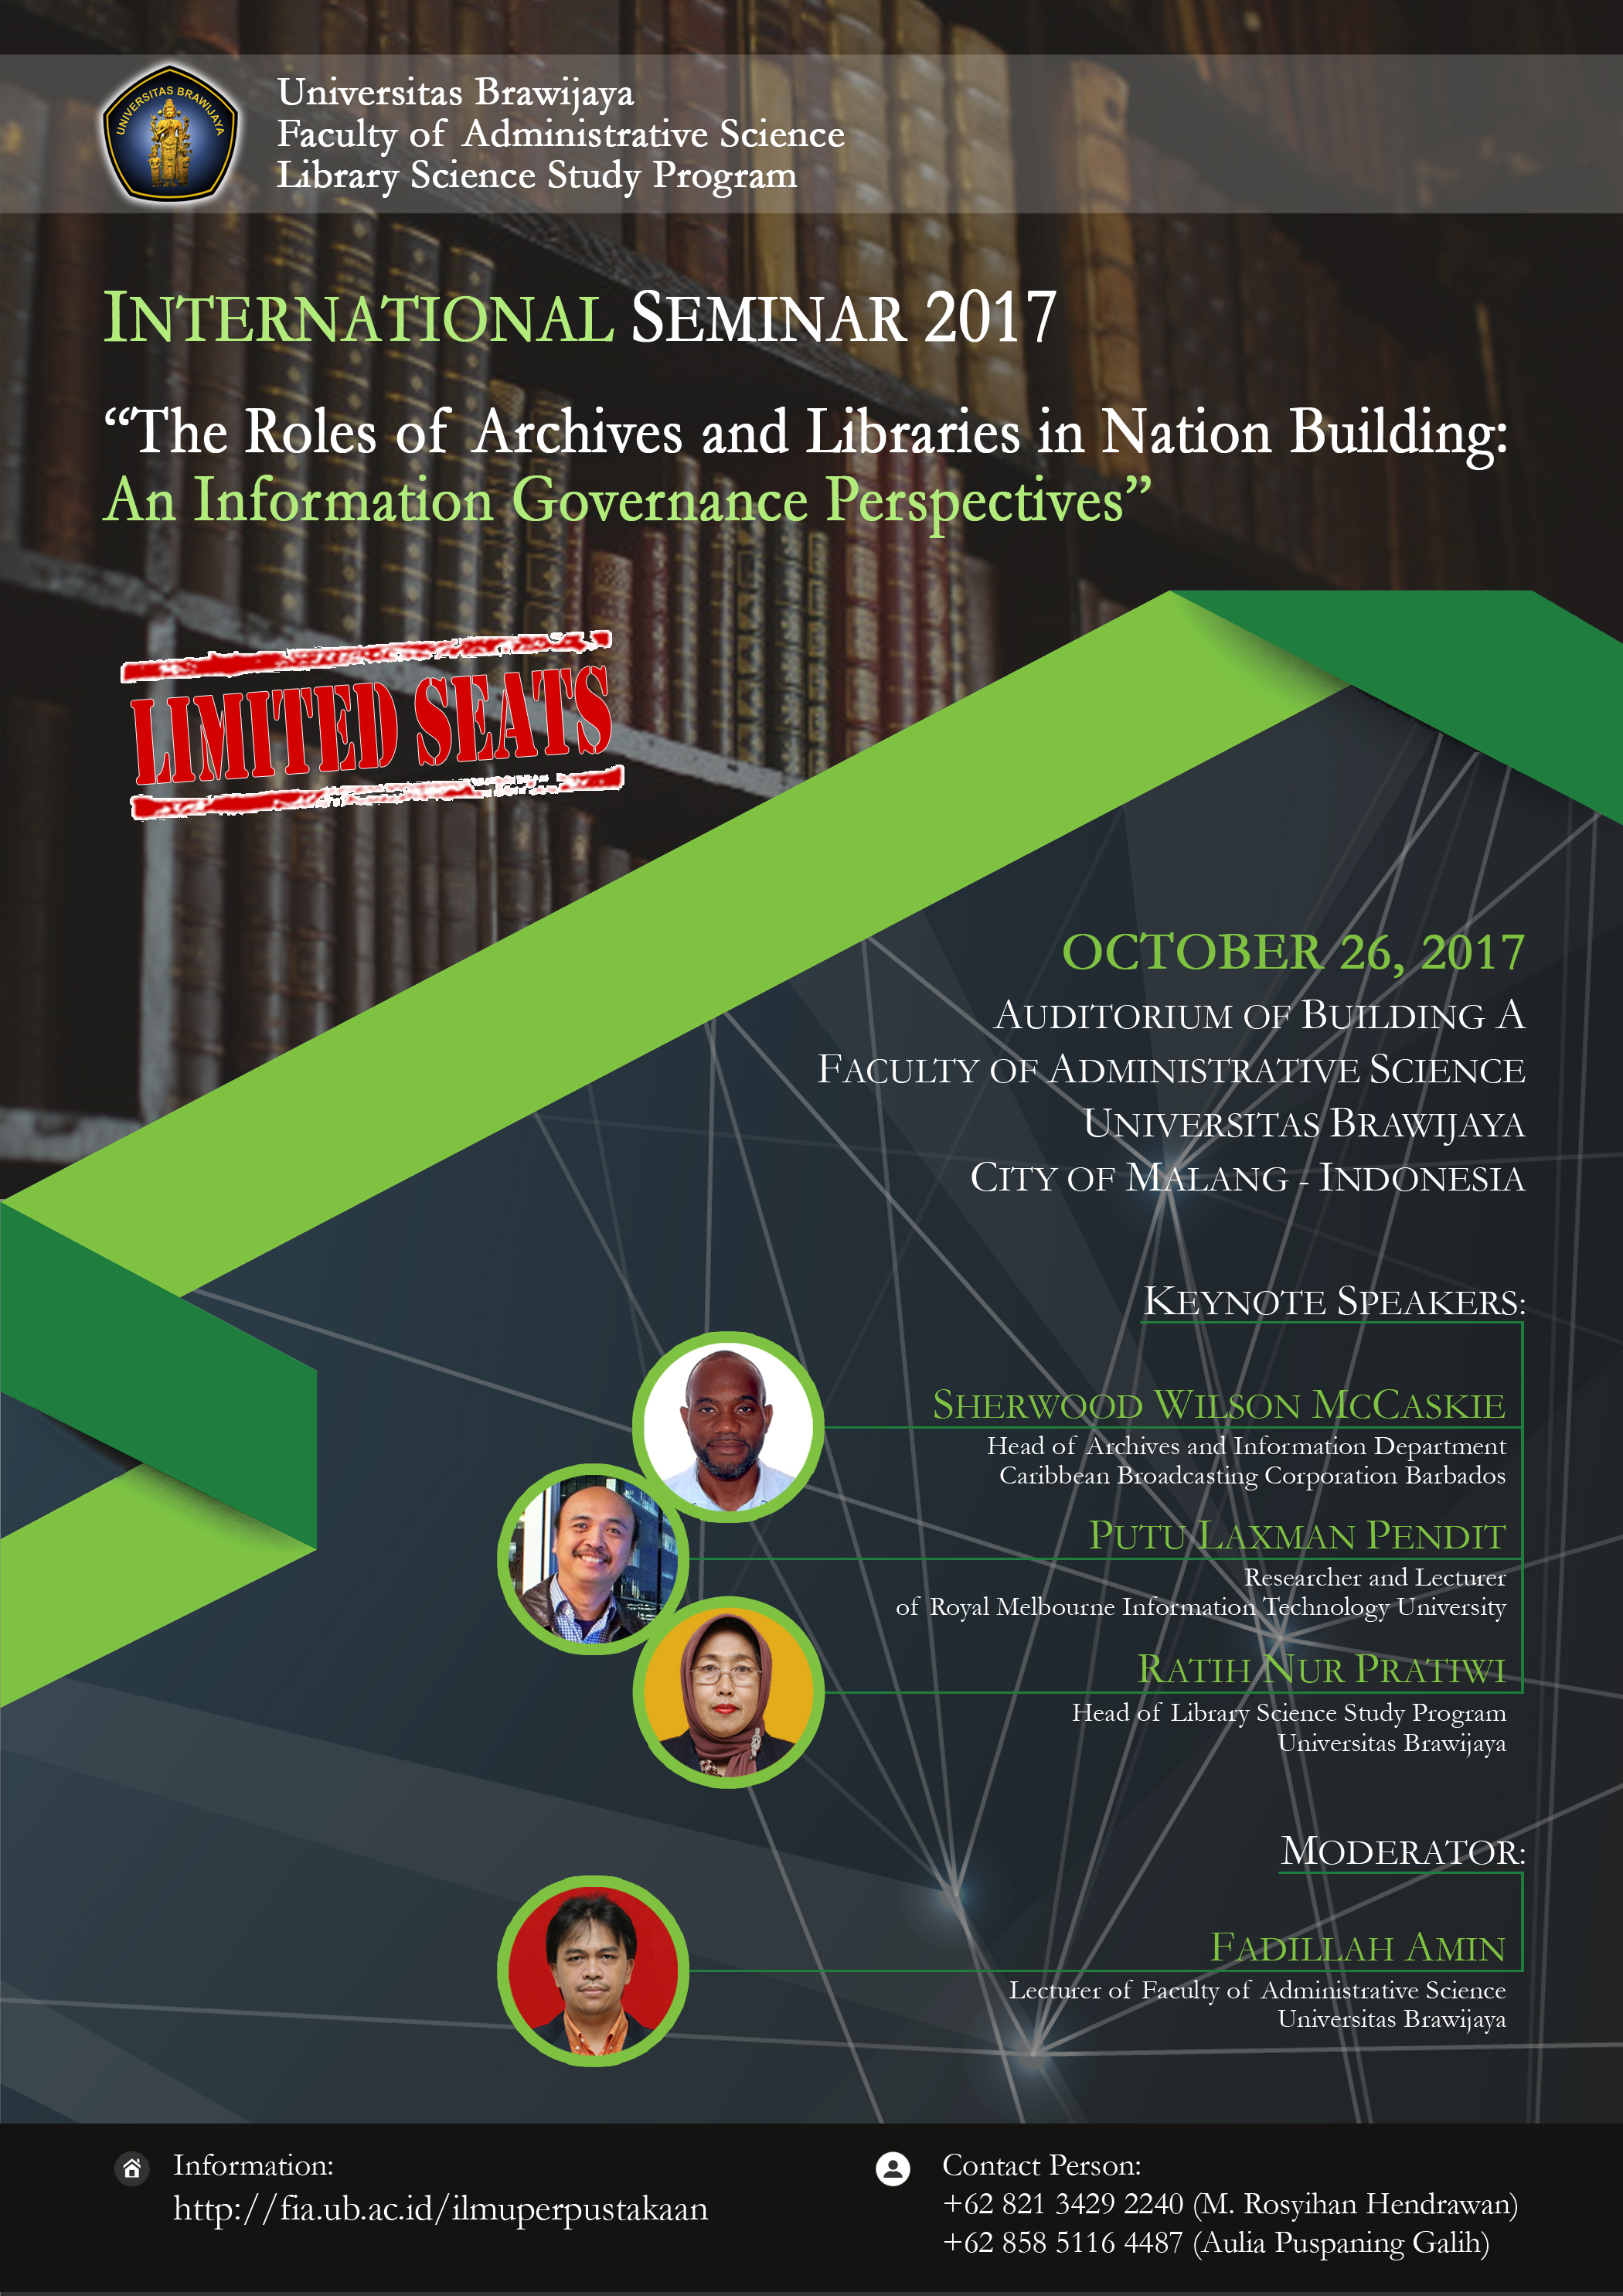 Seminar Internasional “The Roles Of Archives And Libraries In Nation Building : An Information Governance Perspectives”